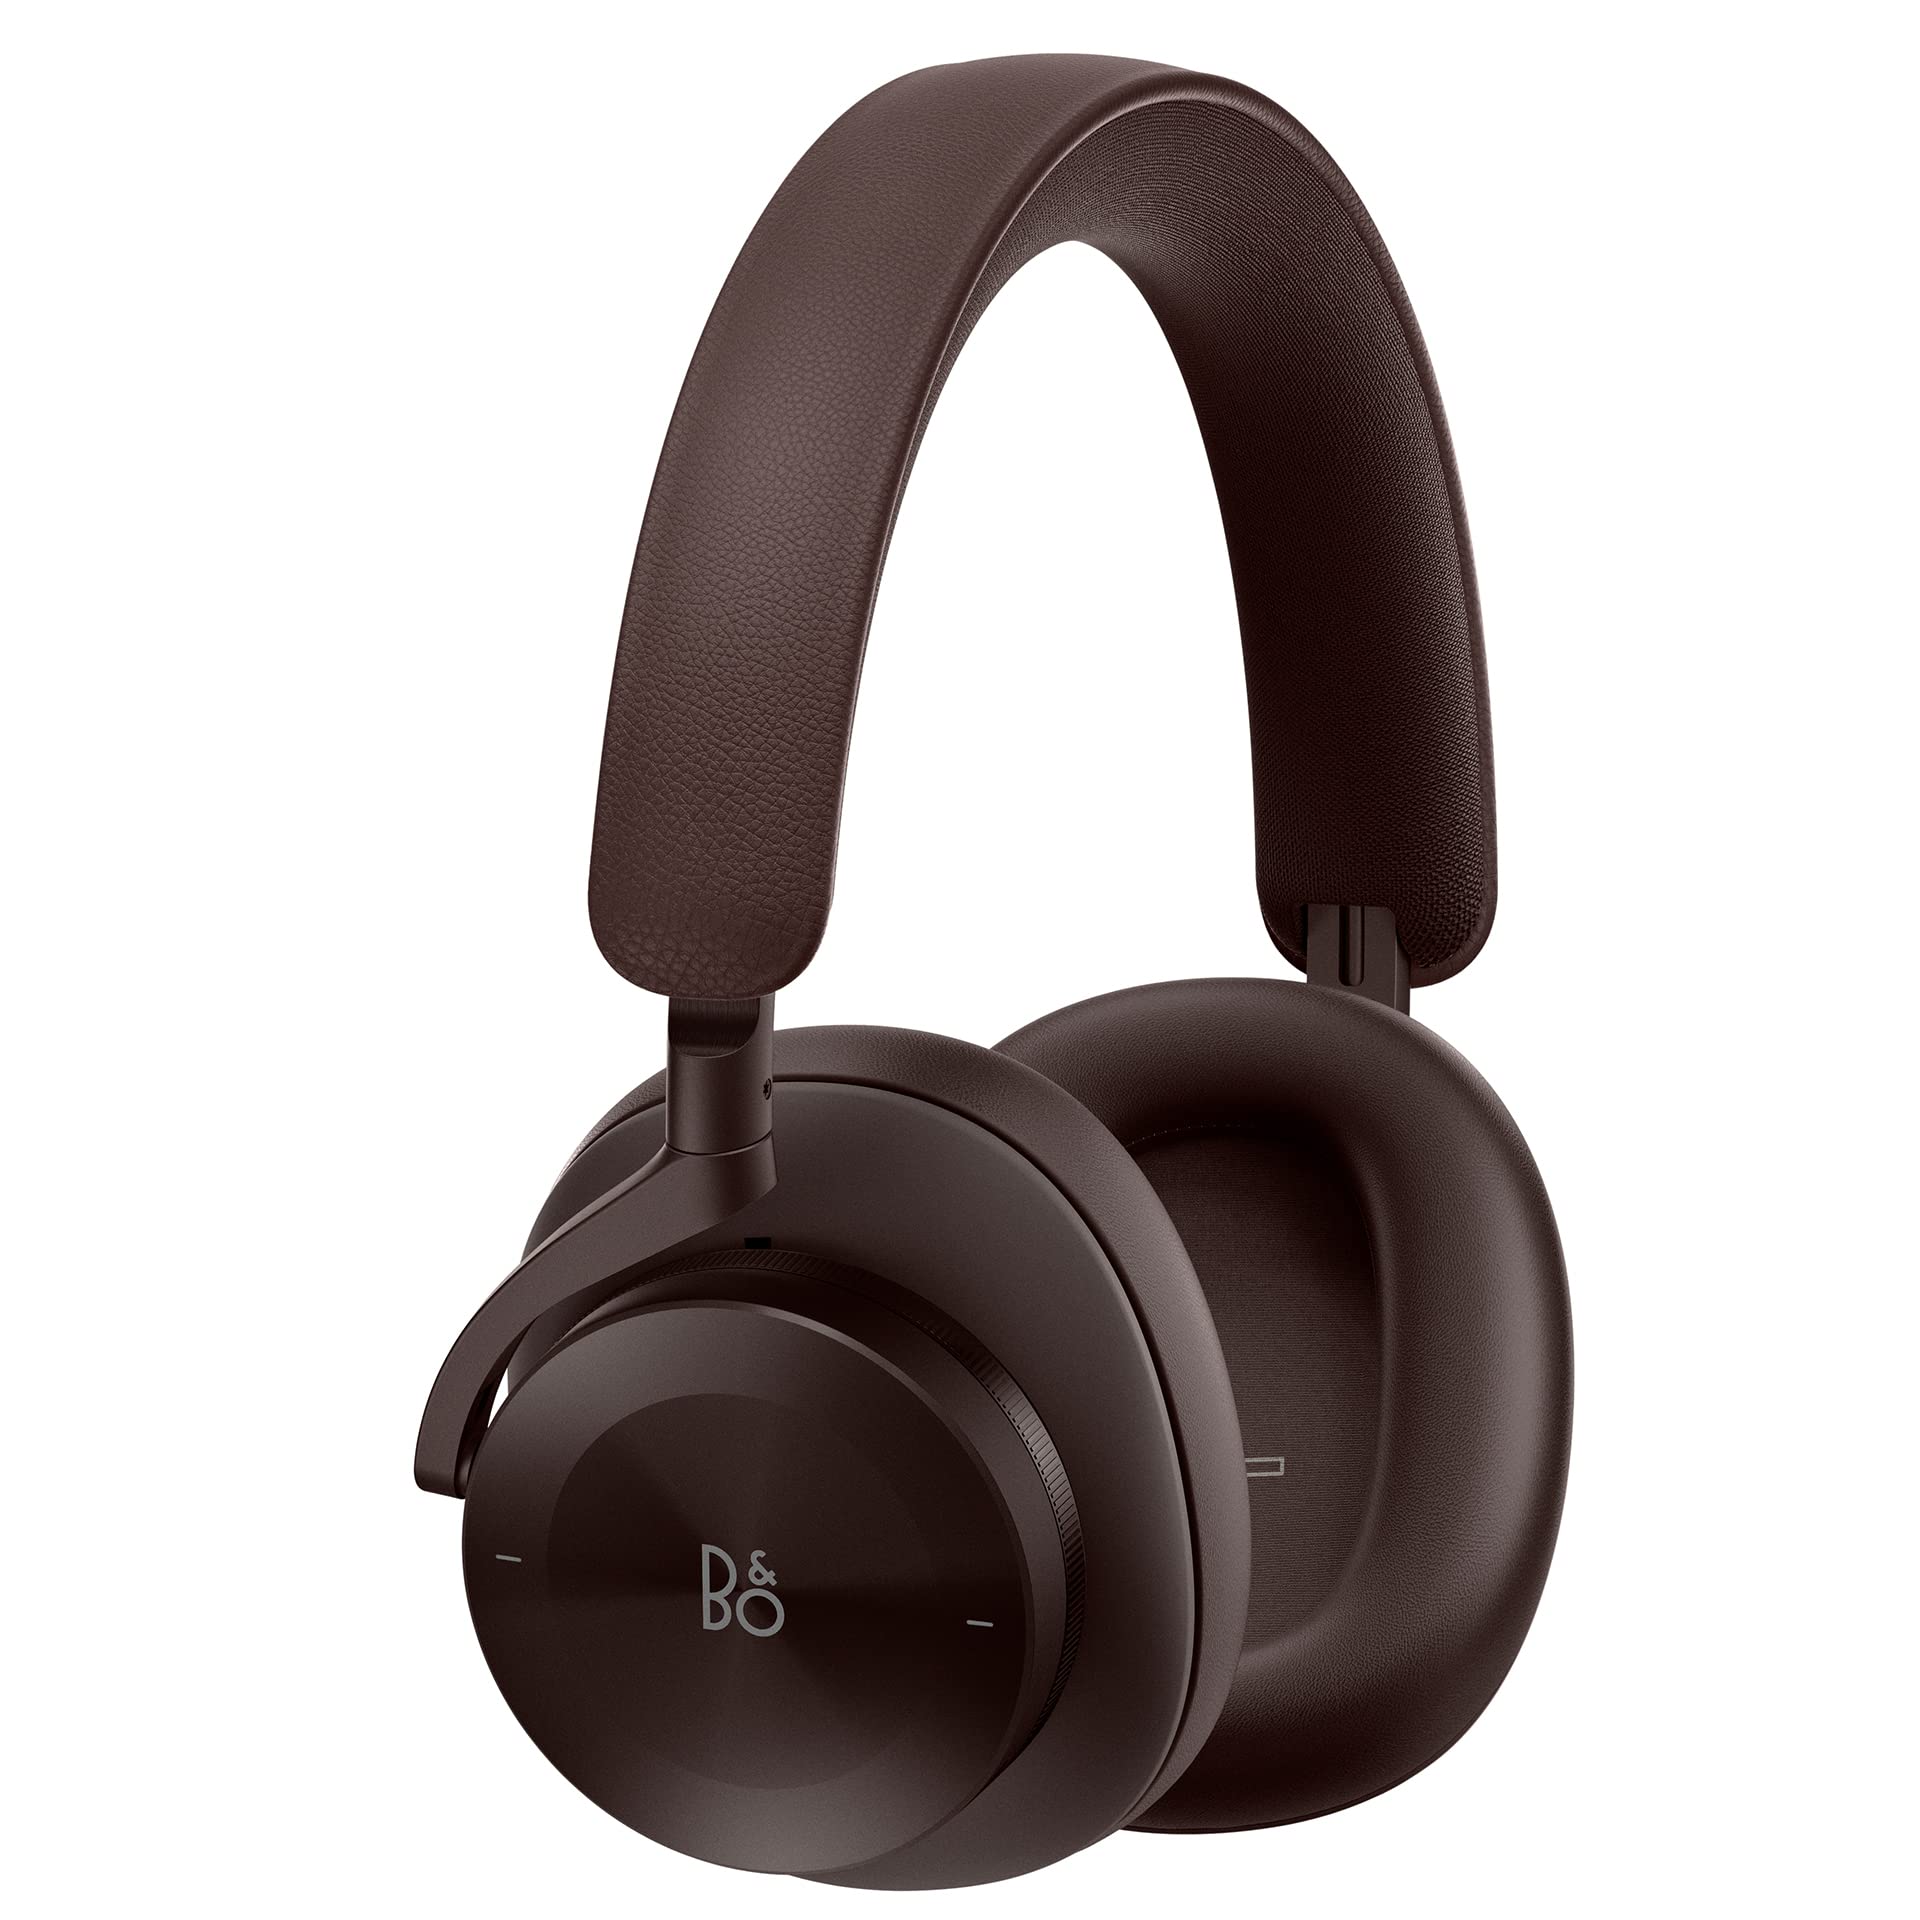 Bang & Olufsen Beoplay H95 Premium Comfortable Wireless Active Noise Cancelling (ANC) Over-Ear Headphones with 38 Hours Battery Life and Protective Carrying Case, Chestnut